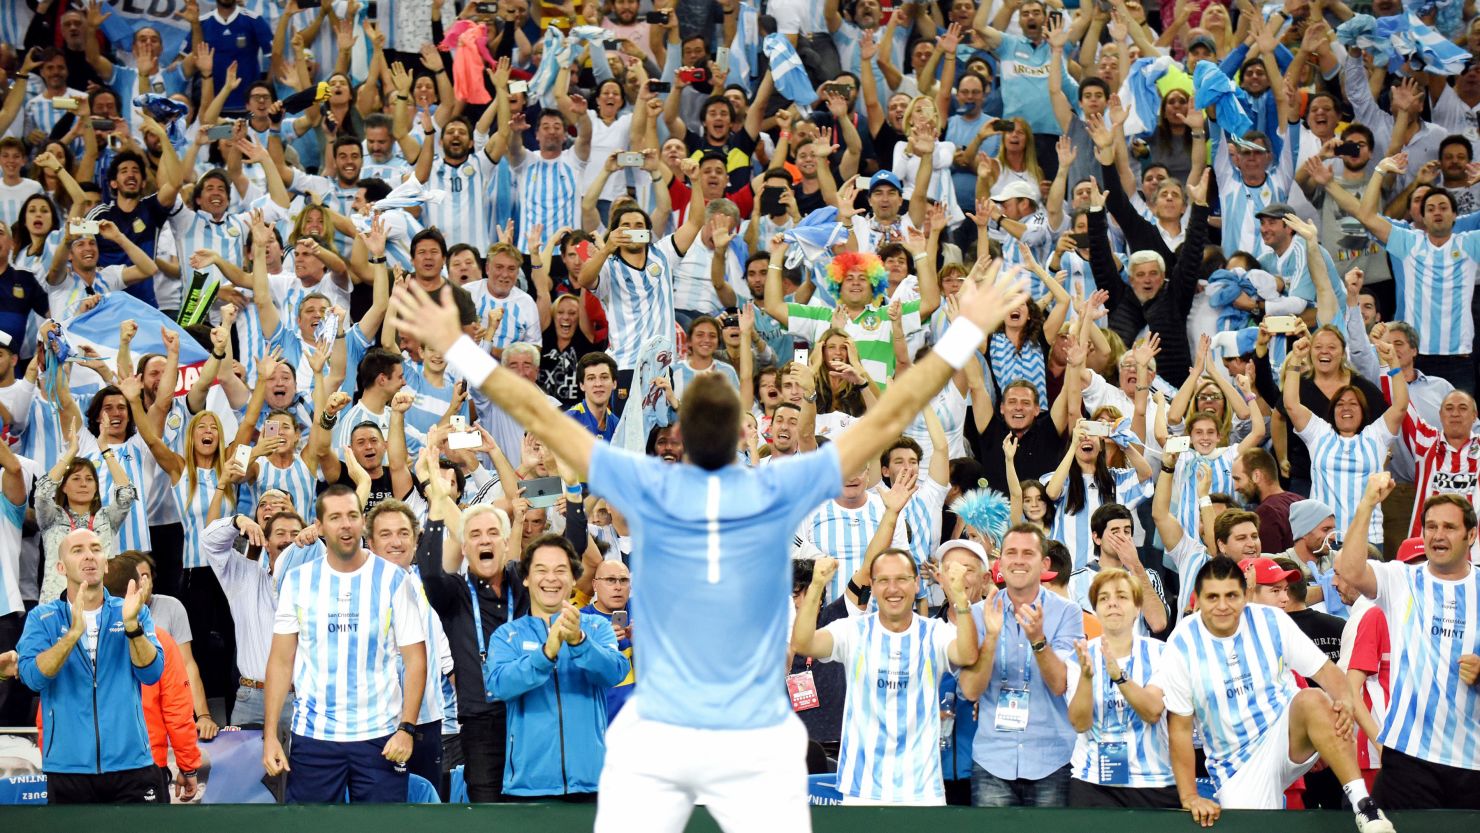 Juan Martin del Potro was the Argentina hero as it claimed the Davis Cup for the first time in its history.